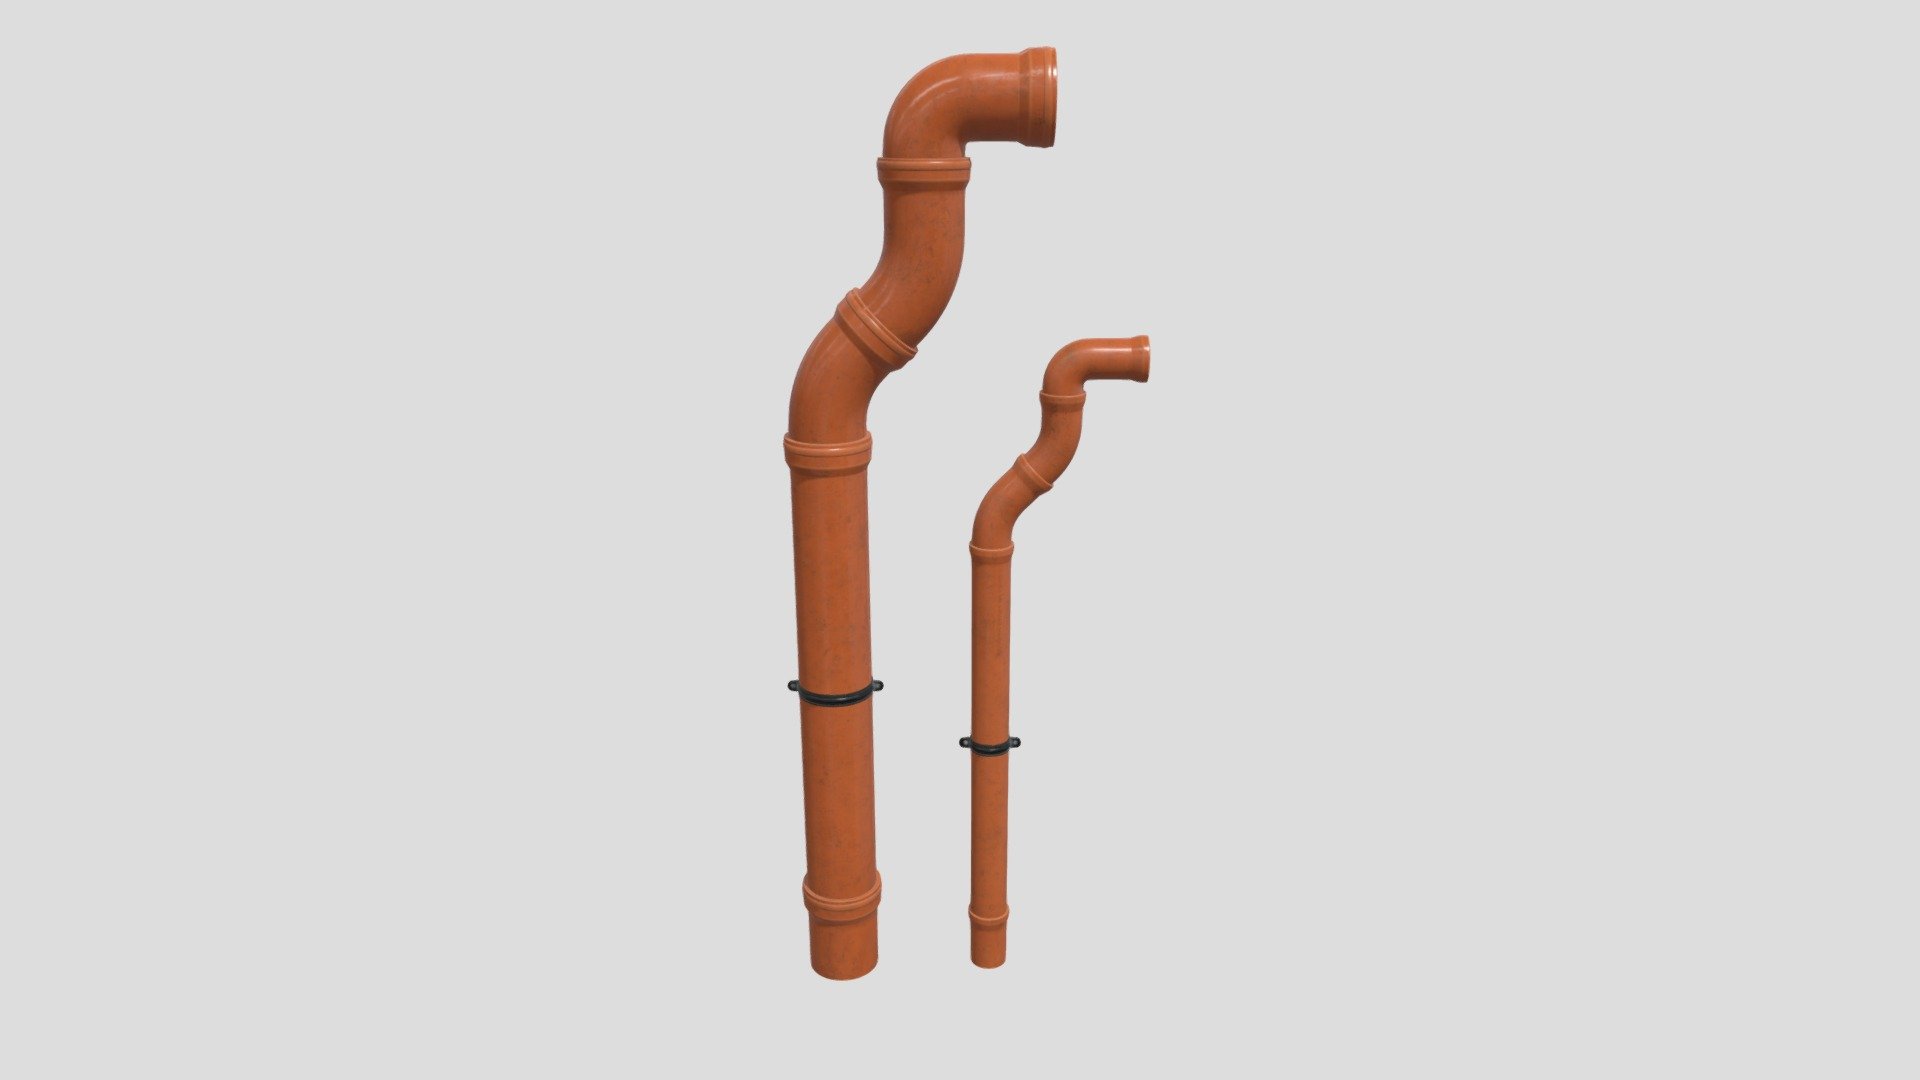 Highly detailed 3d model of pipes with all textures, shaders and materials. This 3d model is ready to use, just put it into your scene 3d model